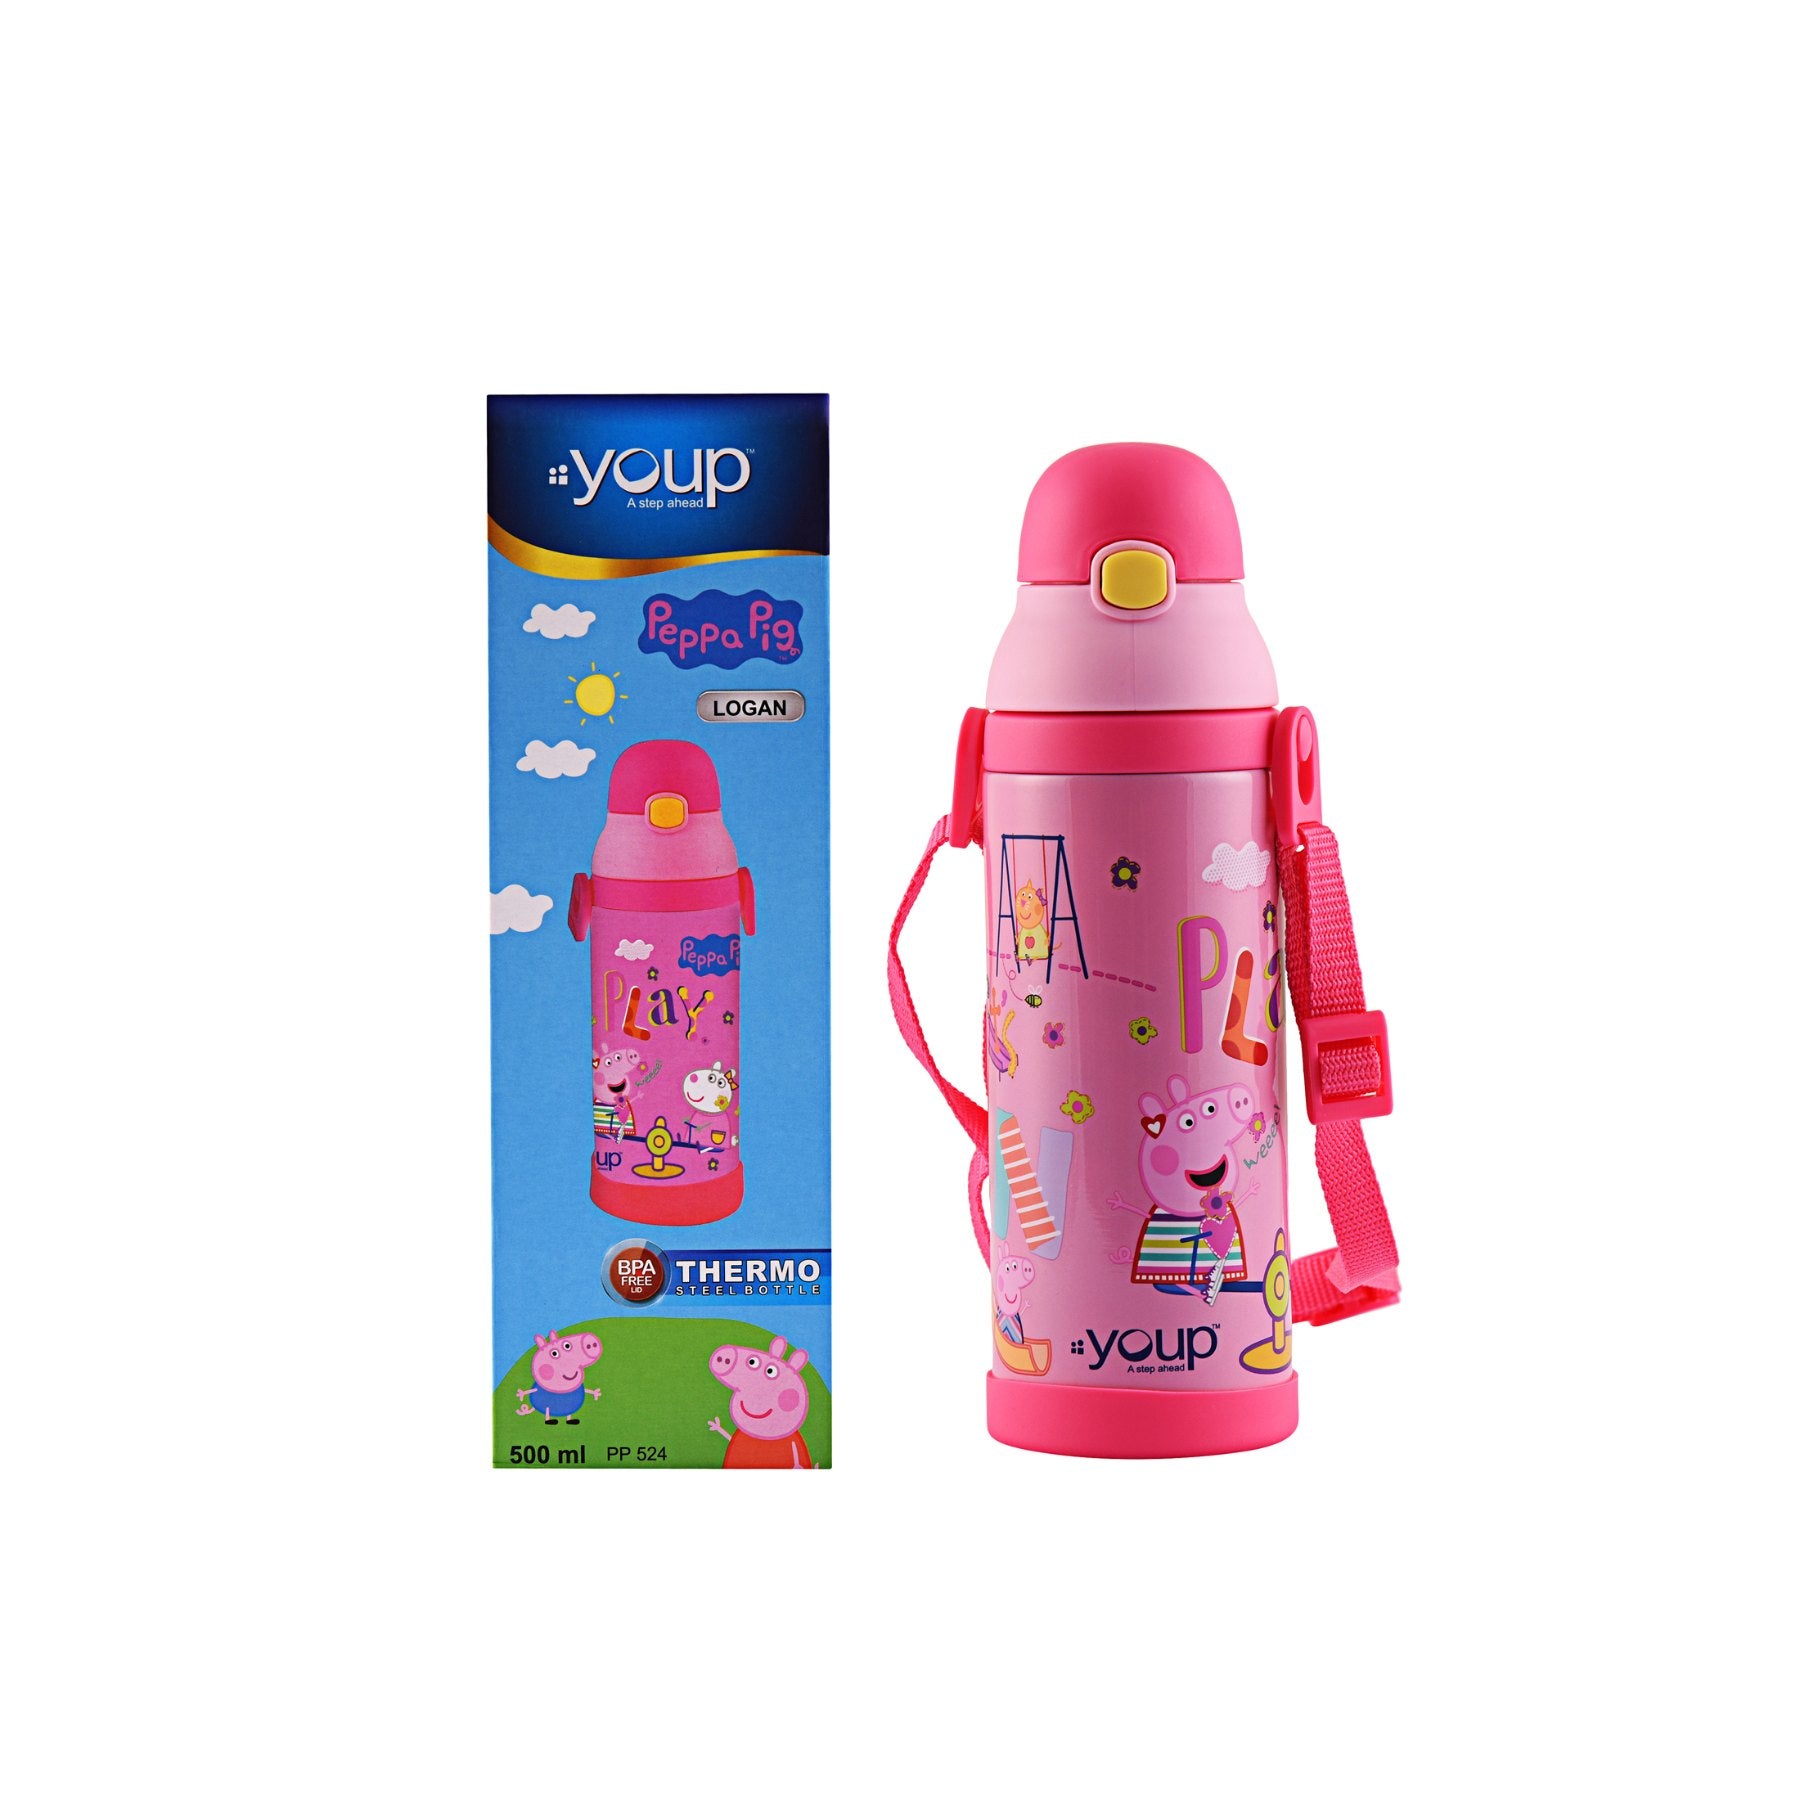 Youp Stainless Steel Insulated Pink Color Peppa Pig Kids Sipper Bottle Logan - 500 Ml